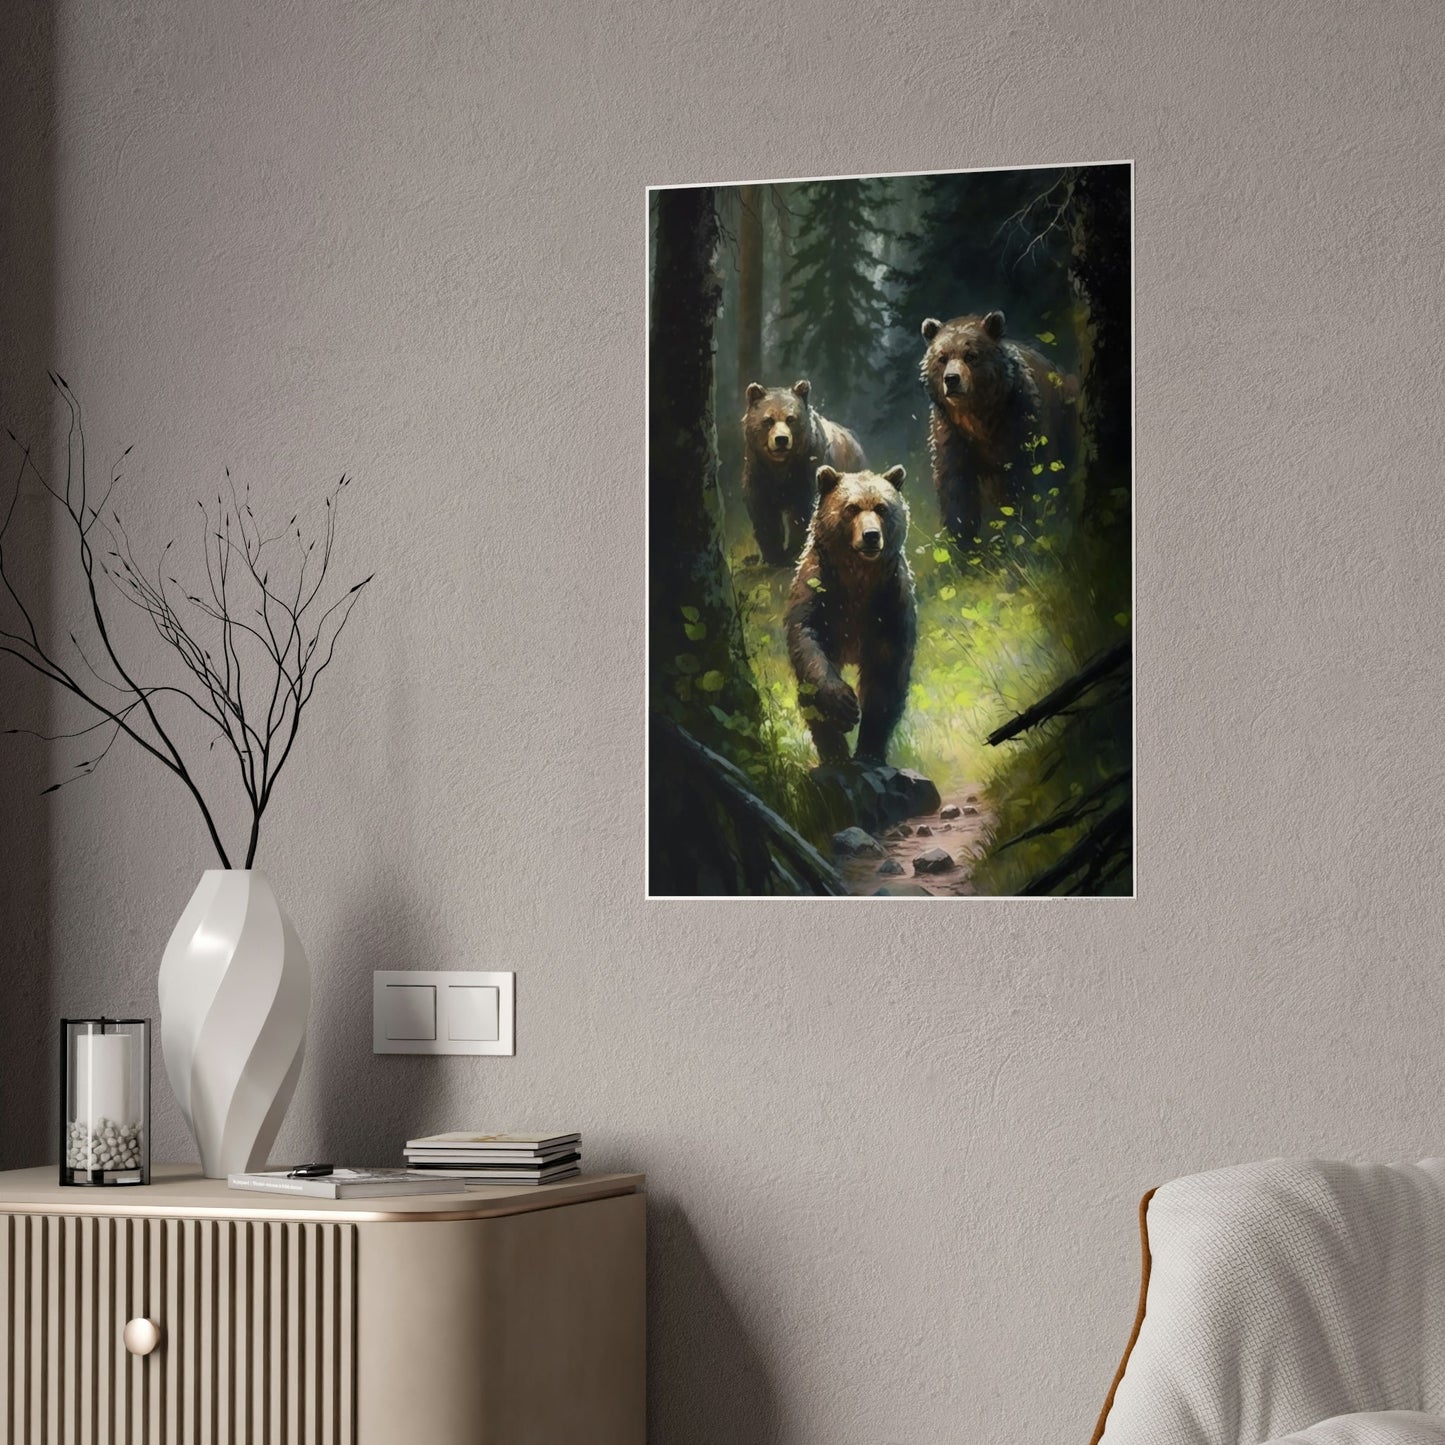 Bear Adventure: Framed Canvas & Poster Print of Curious Grizzly Bears